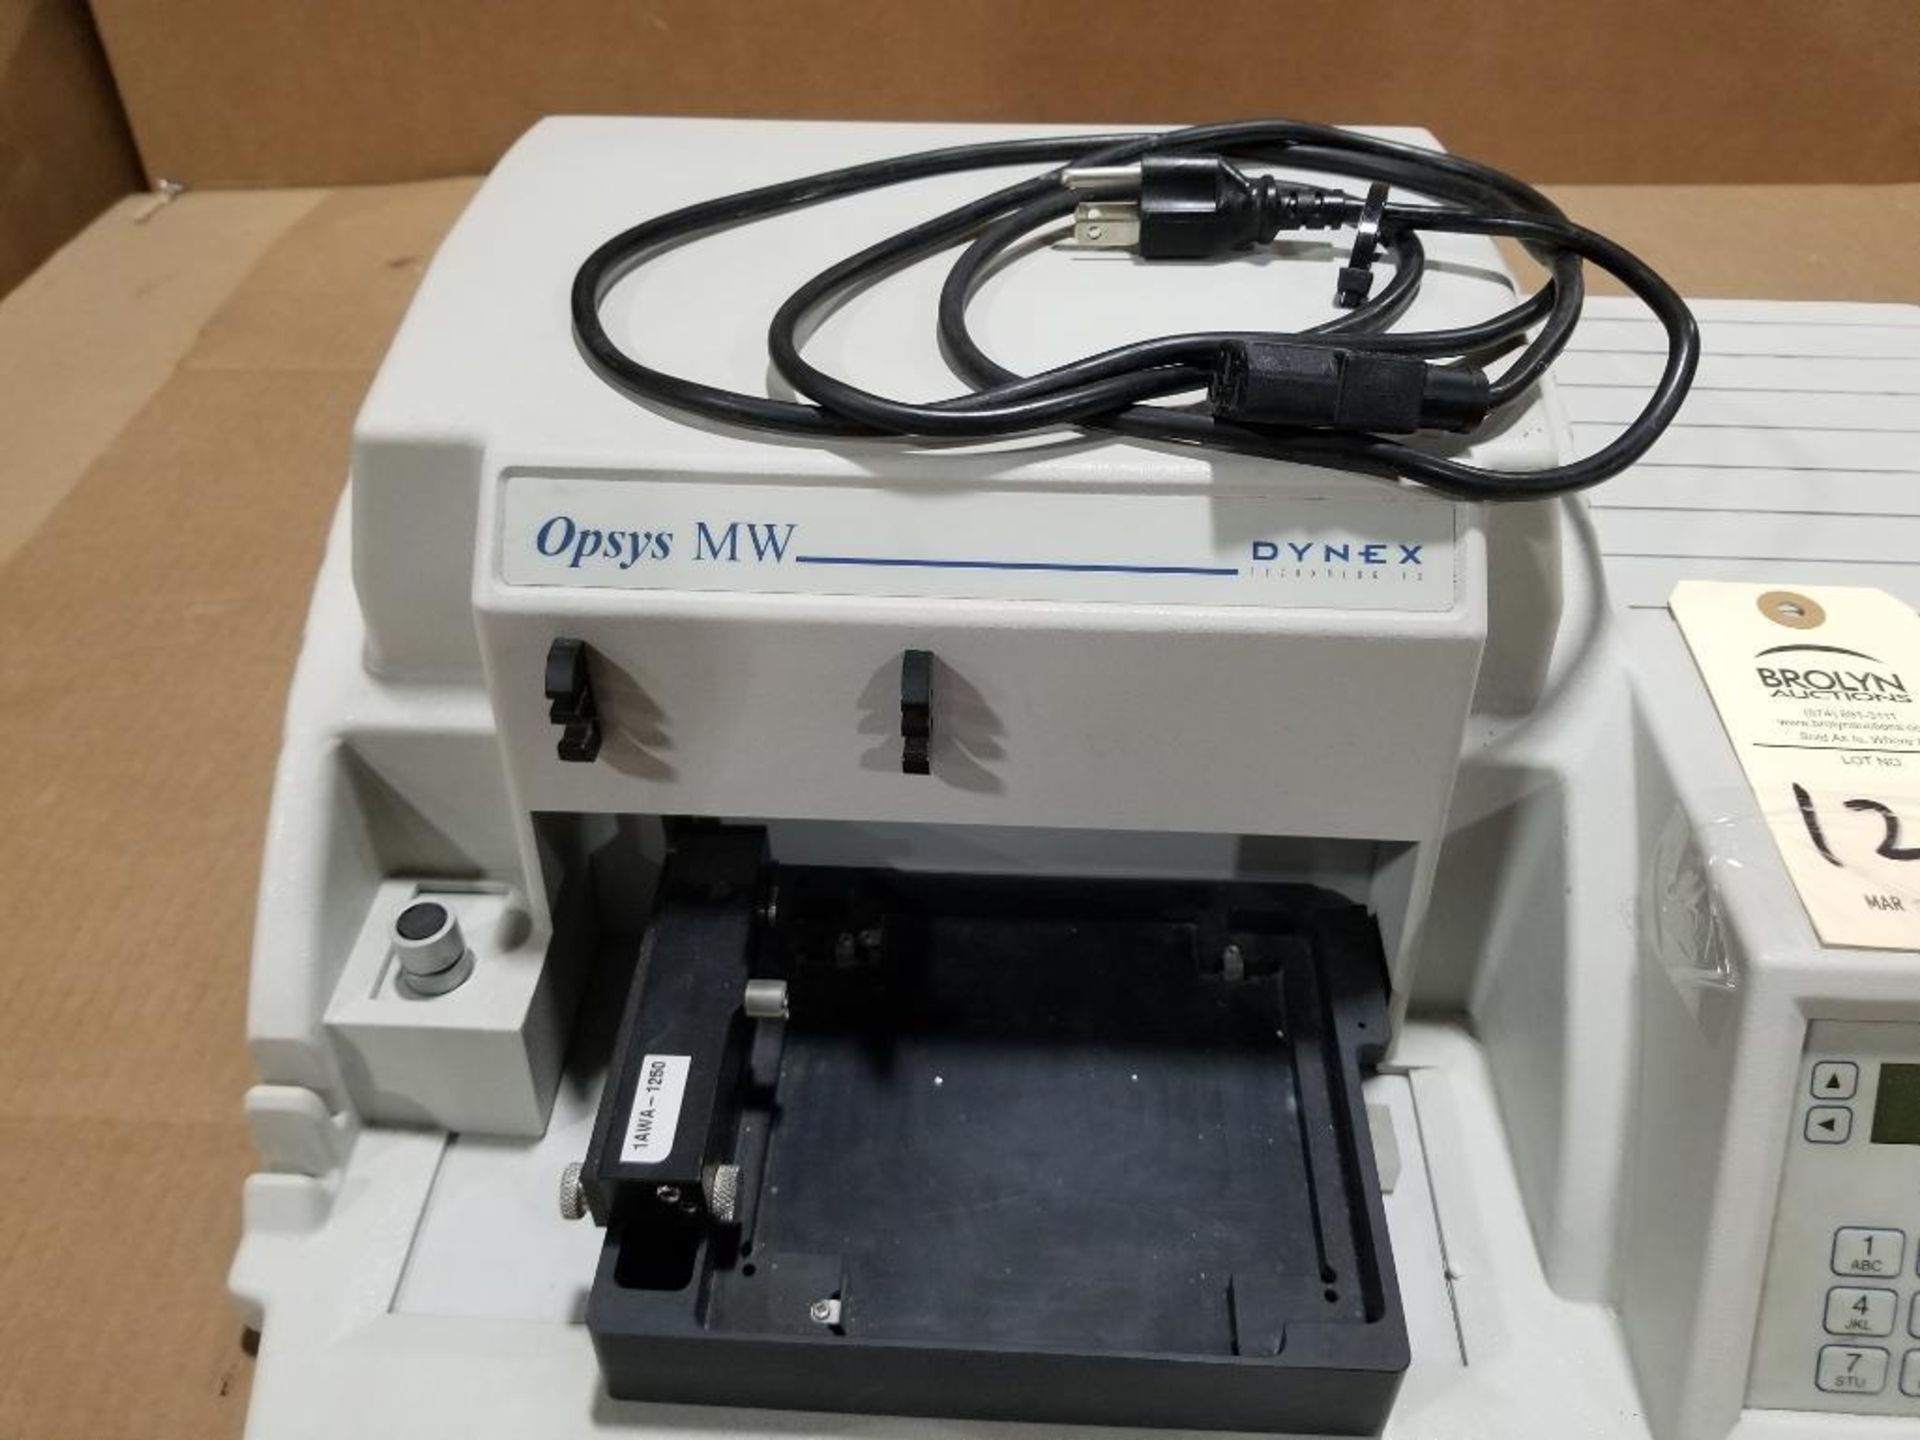 Dynex Opsys MW micro plate washer. - Image 5 of 8